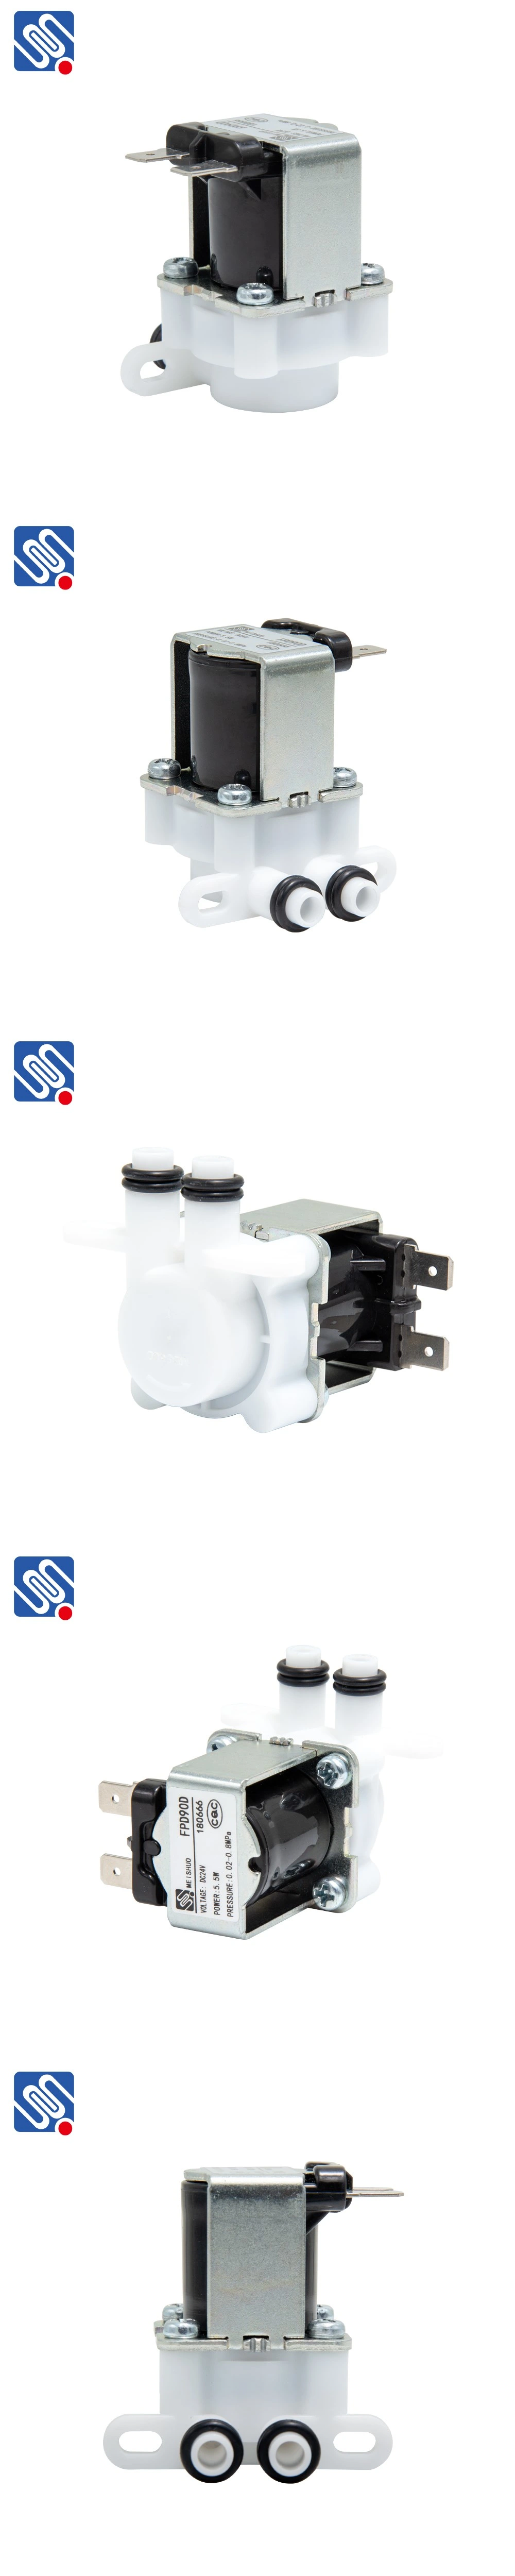 Meishuo Fpd90d DC12V Normally Closed Electric Plastic Water Valves for Integrated Waterway Series Solenoid Valves